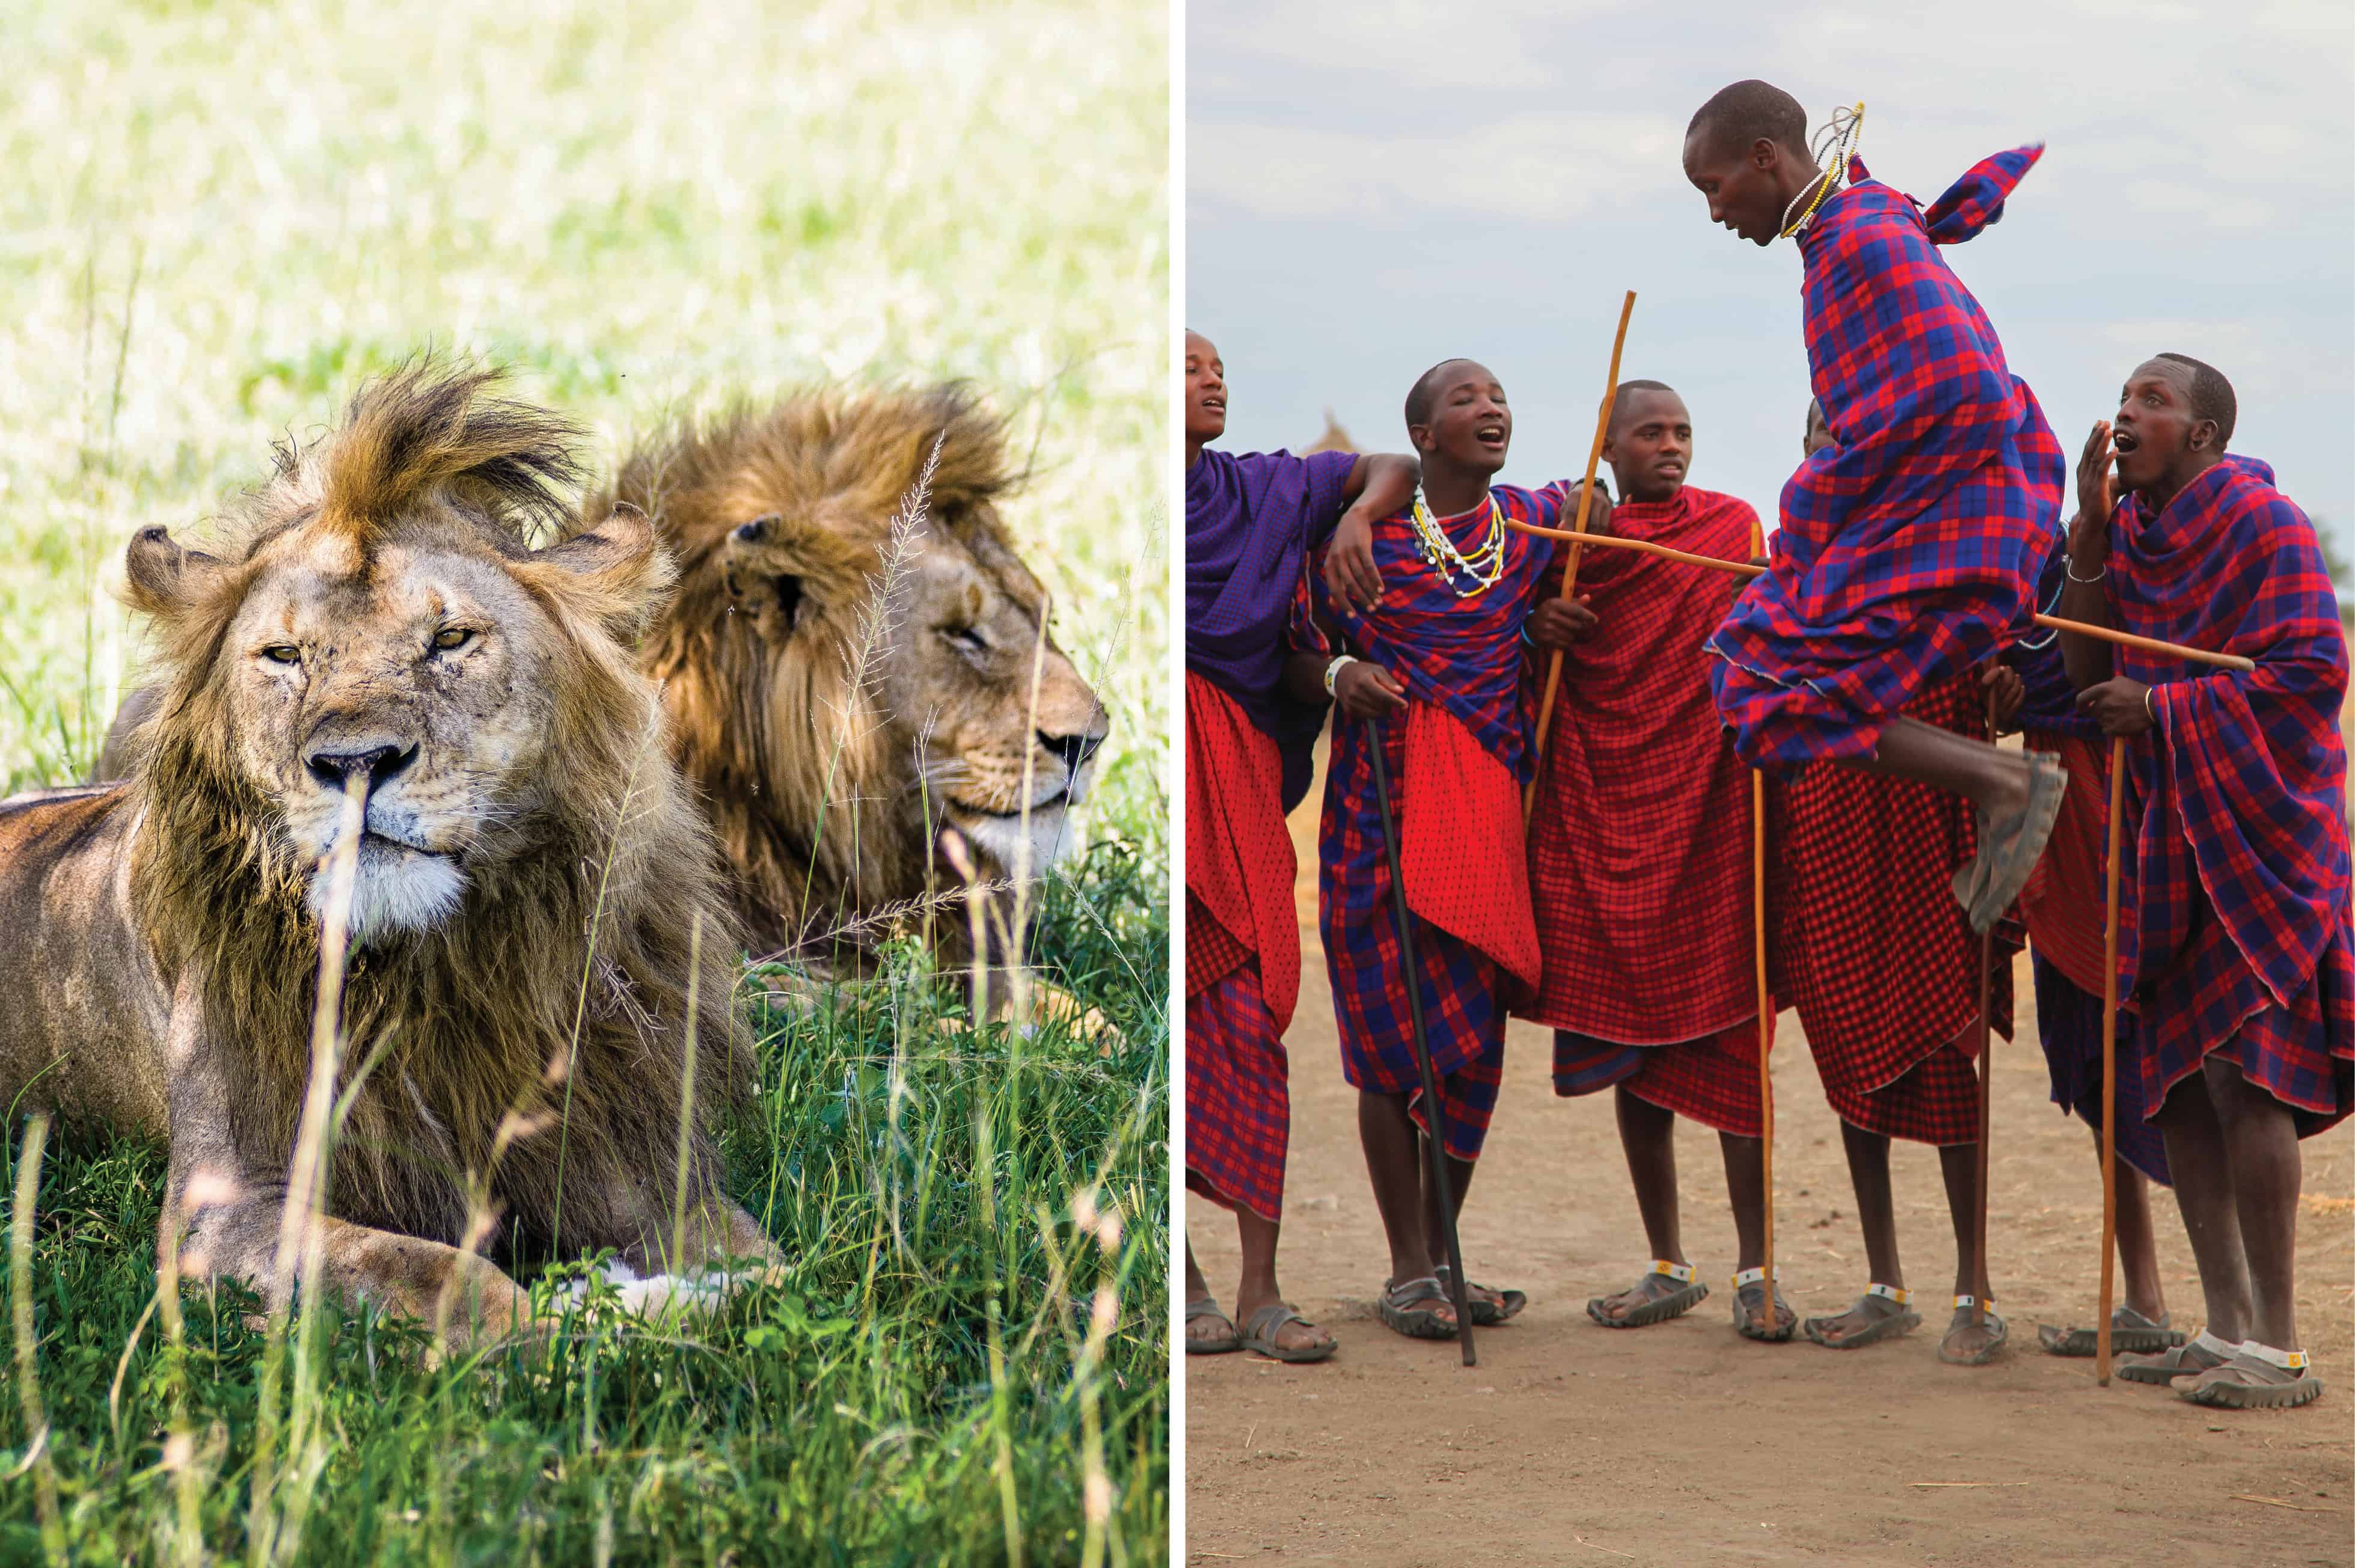 Lions and local people celebrating in Tanzania